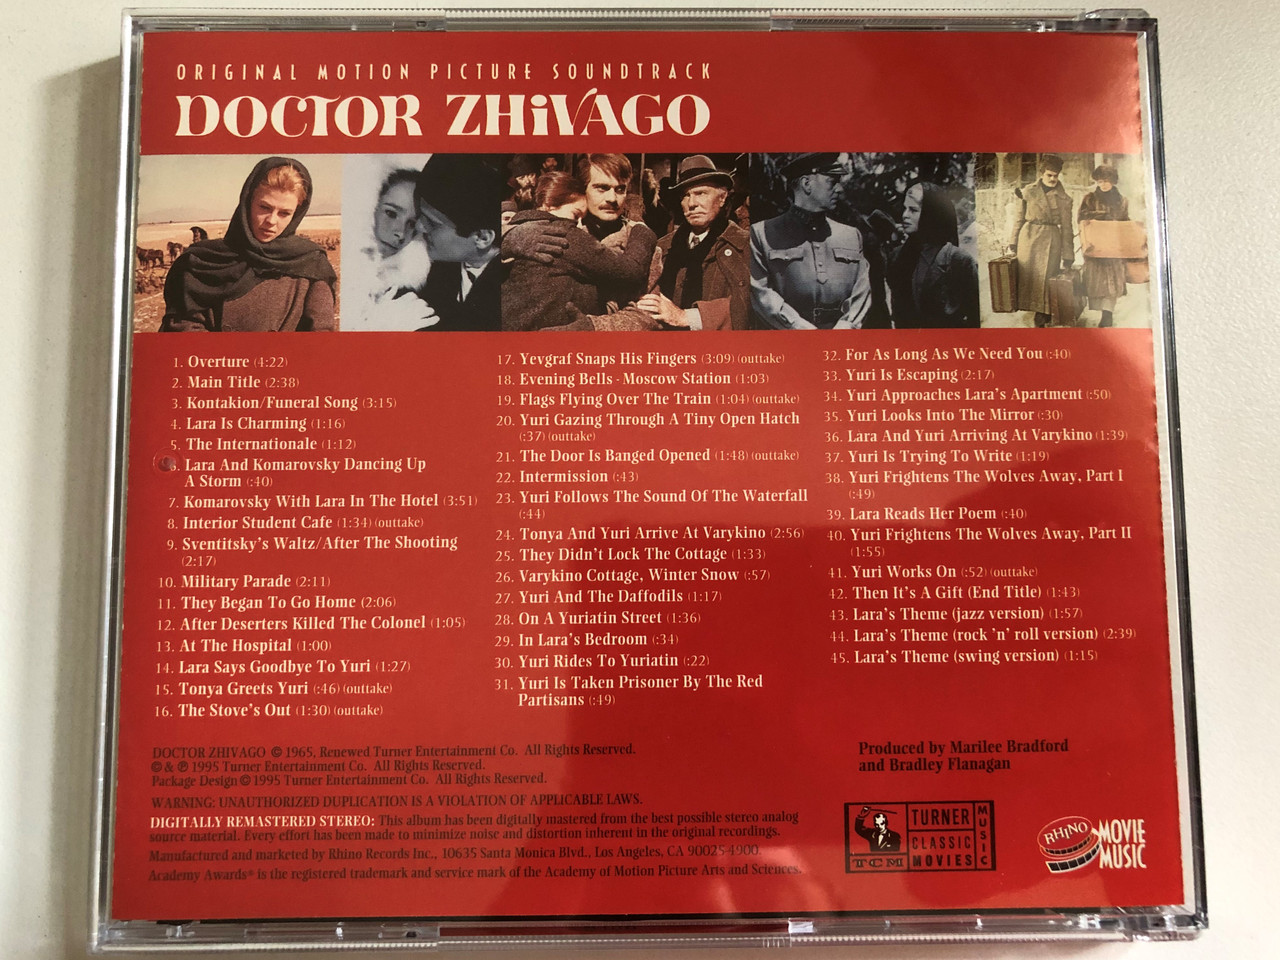 https://cdn10.bigcommerce.com/s-62bdpkt7pb/products/0/images/292525/Doctor_Zhivago_Original_Motion_Picture_Soundtrack_-_Composed_and_Conducted_By_Maurice_Jarre_The_Deluxe_Thirtieth_Anniversary_Edition_TCM_Turner_Classic_Movies_Music_Audio_CD_1995_R2_71__38283.1691673995.1280.1280.JPG?c=2&_gl=1*1yhetll*_ga*MjA2NTIxMjE2MC4xNTkwNTEyNTMy*_ga_WS2VZYPC6G*MTY5MTY3MTE1OS4xMDE2LjEuMTY5MTY3MzY4My40NS4wLjA.